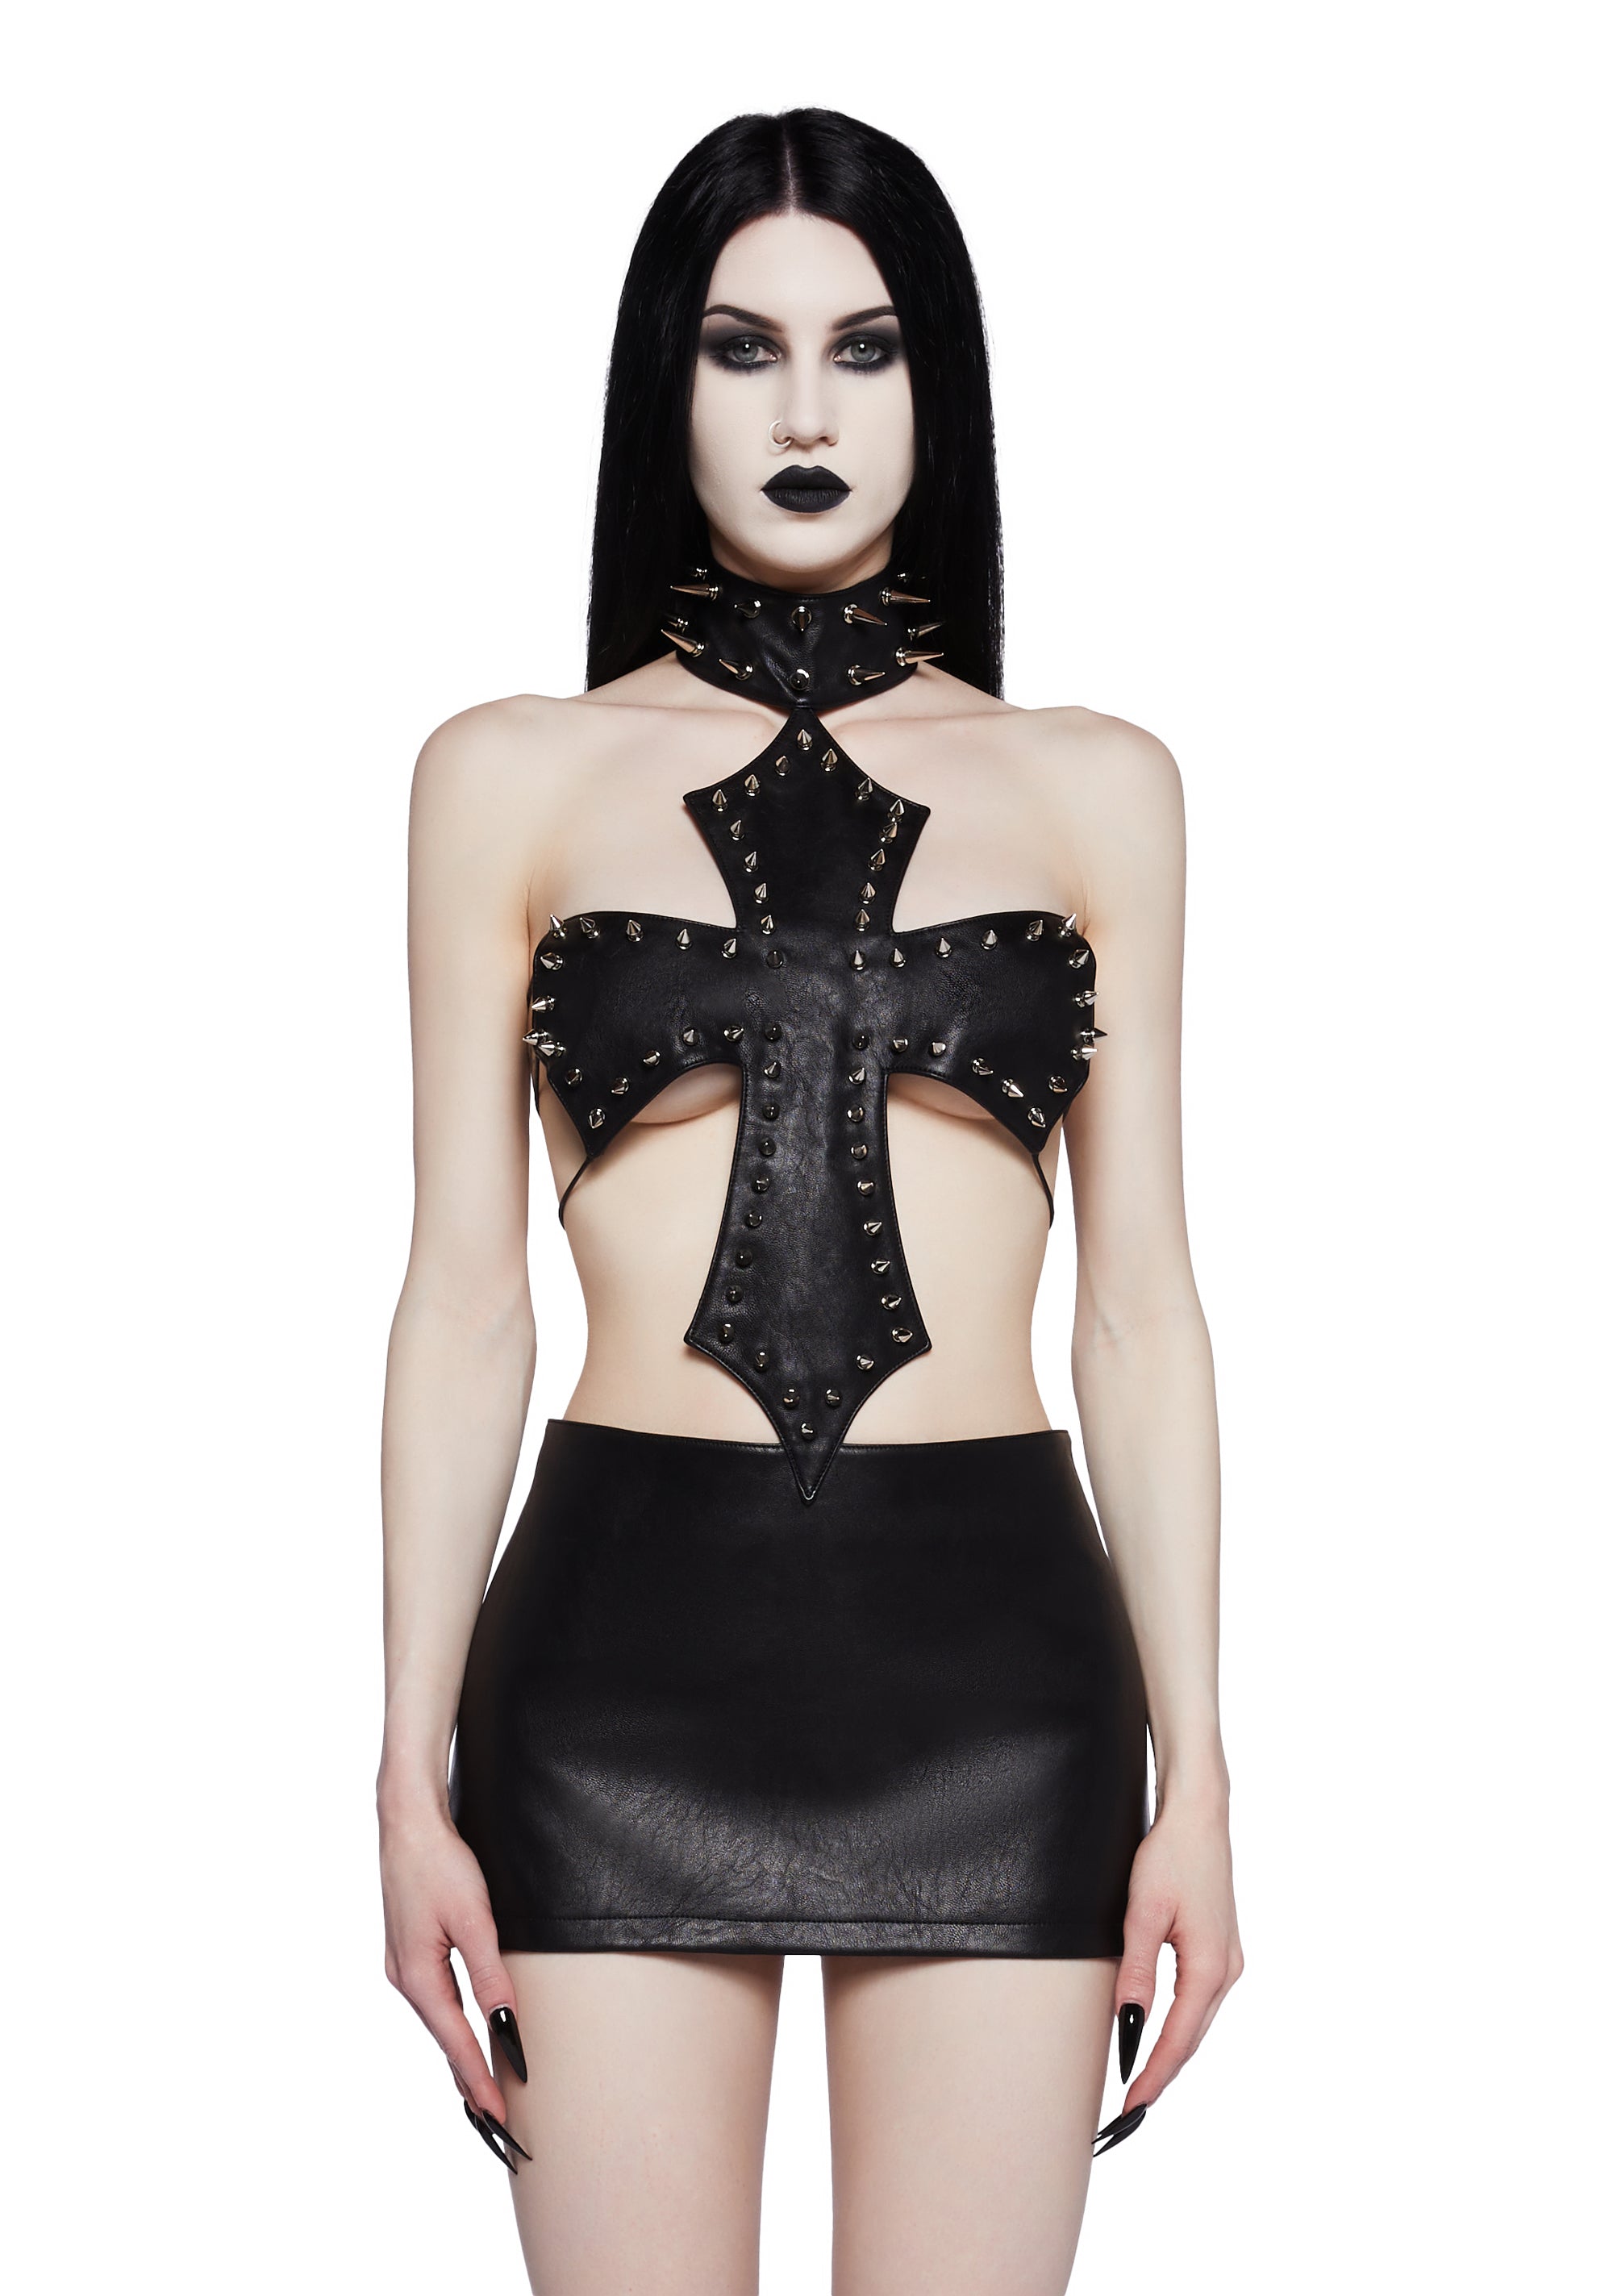 Wolf & Whistle Mesh Cut Out Harness Strappy Bra - Black – Dolls Kill